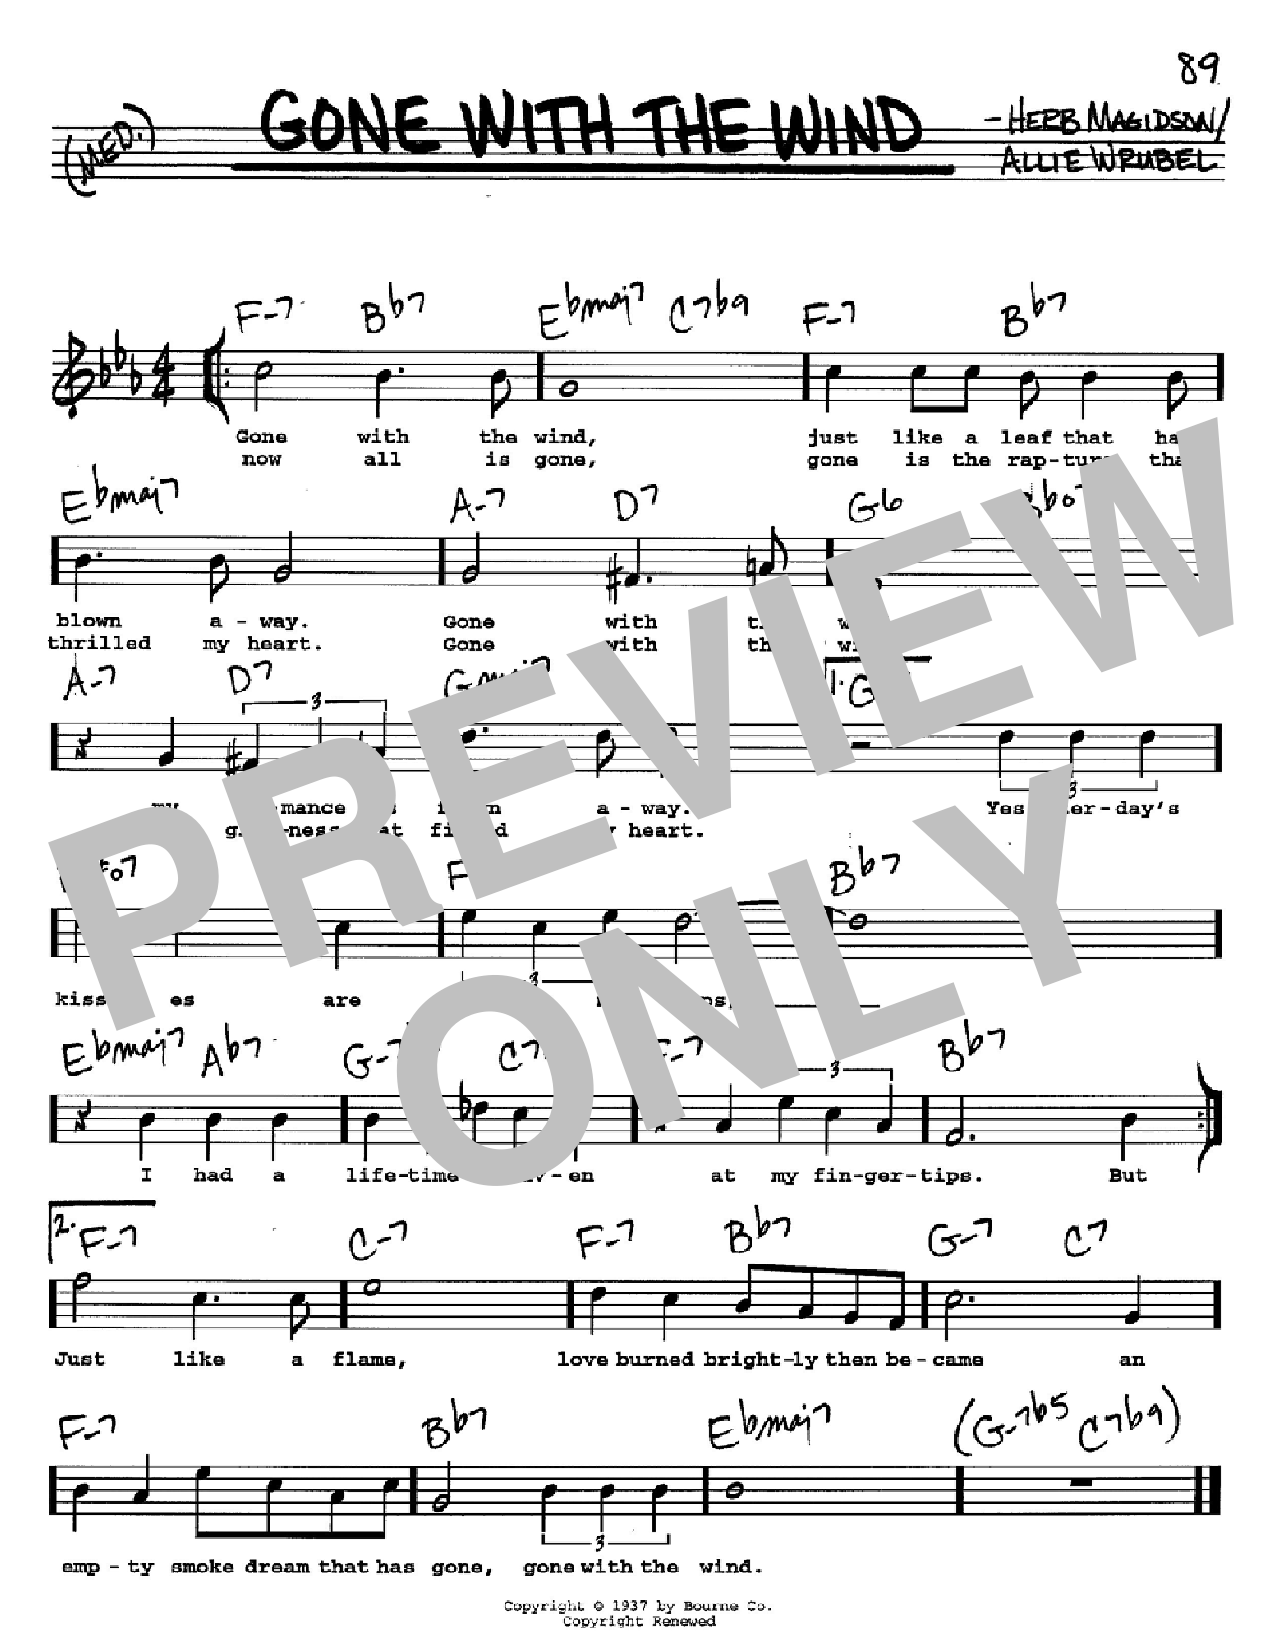 Herb Magidson Gone With The Wind sheet music notes and chords. Download Printable PDF.